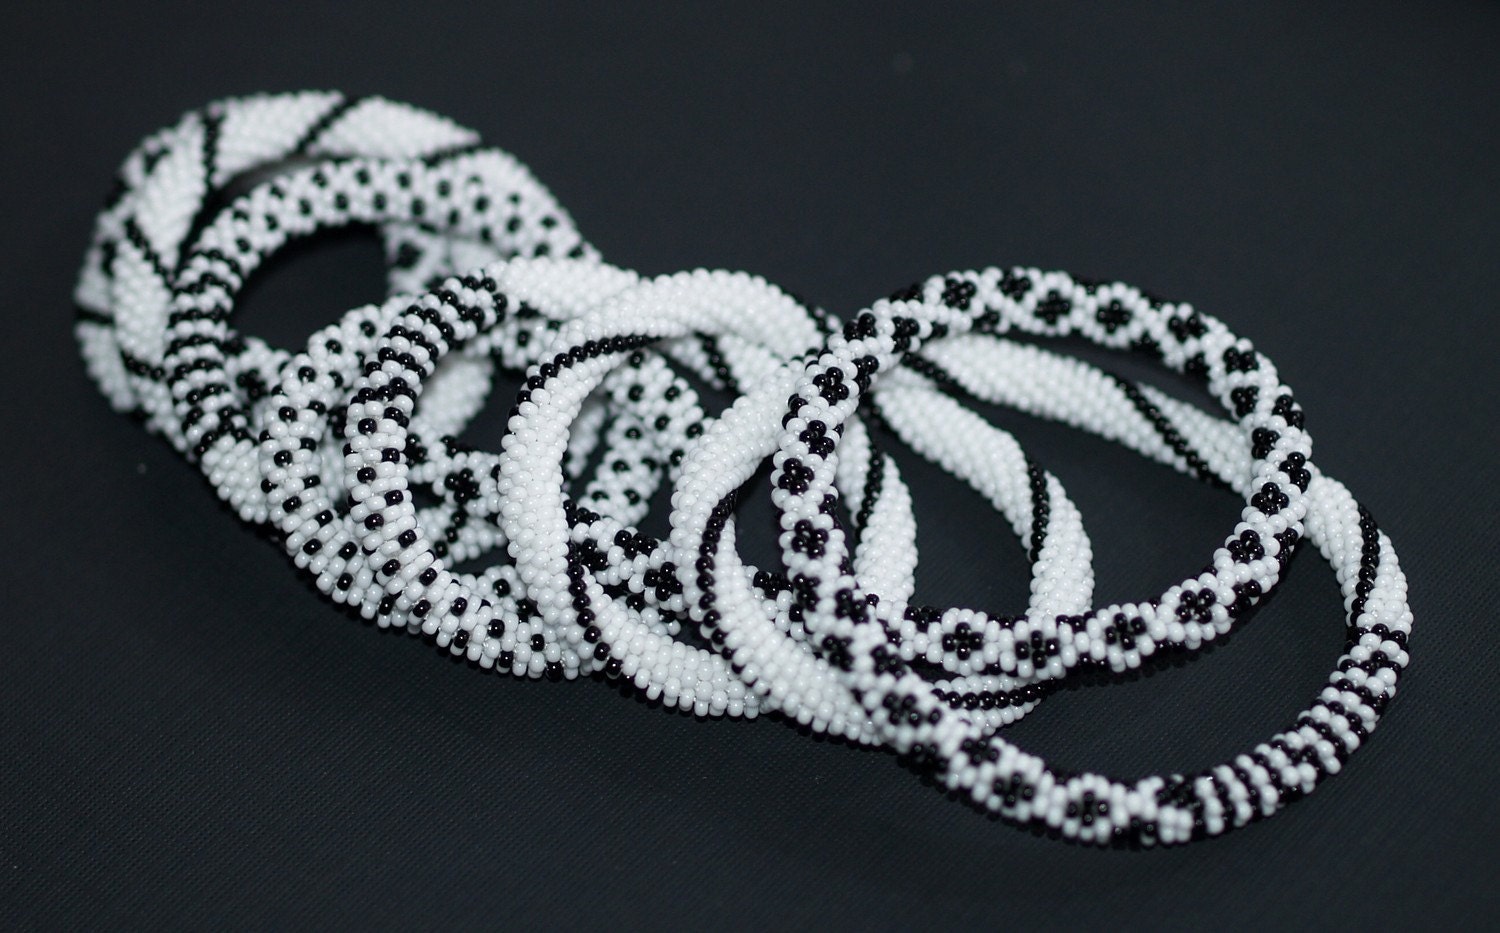 Salt and Pepper - Black and White Bead Crochet Necklace (3305)